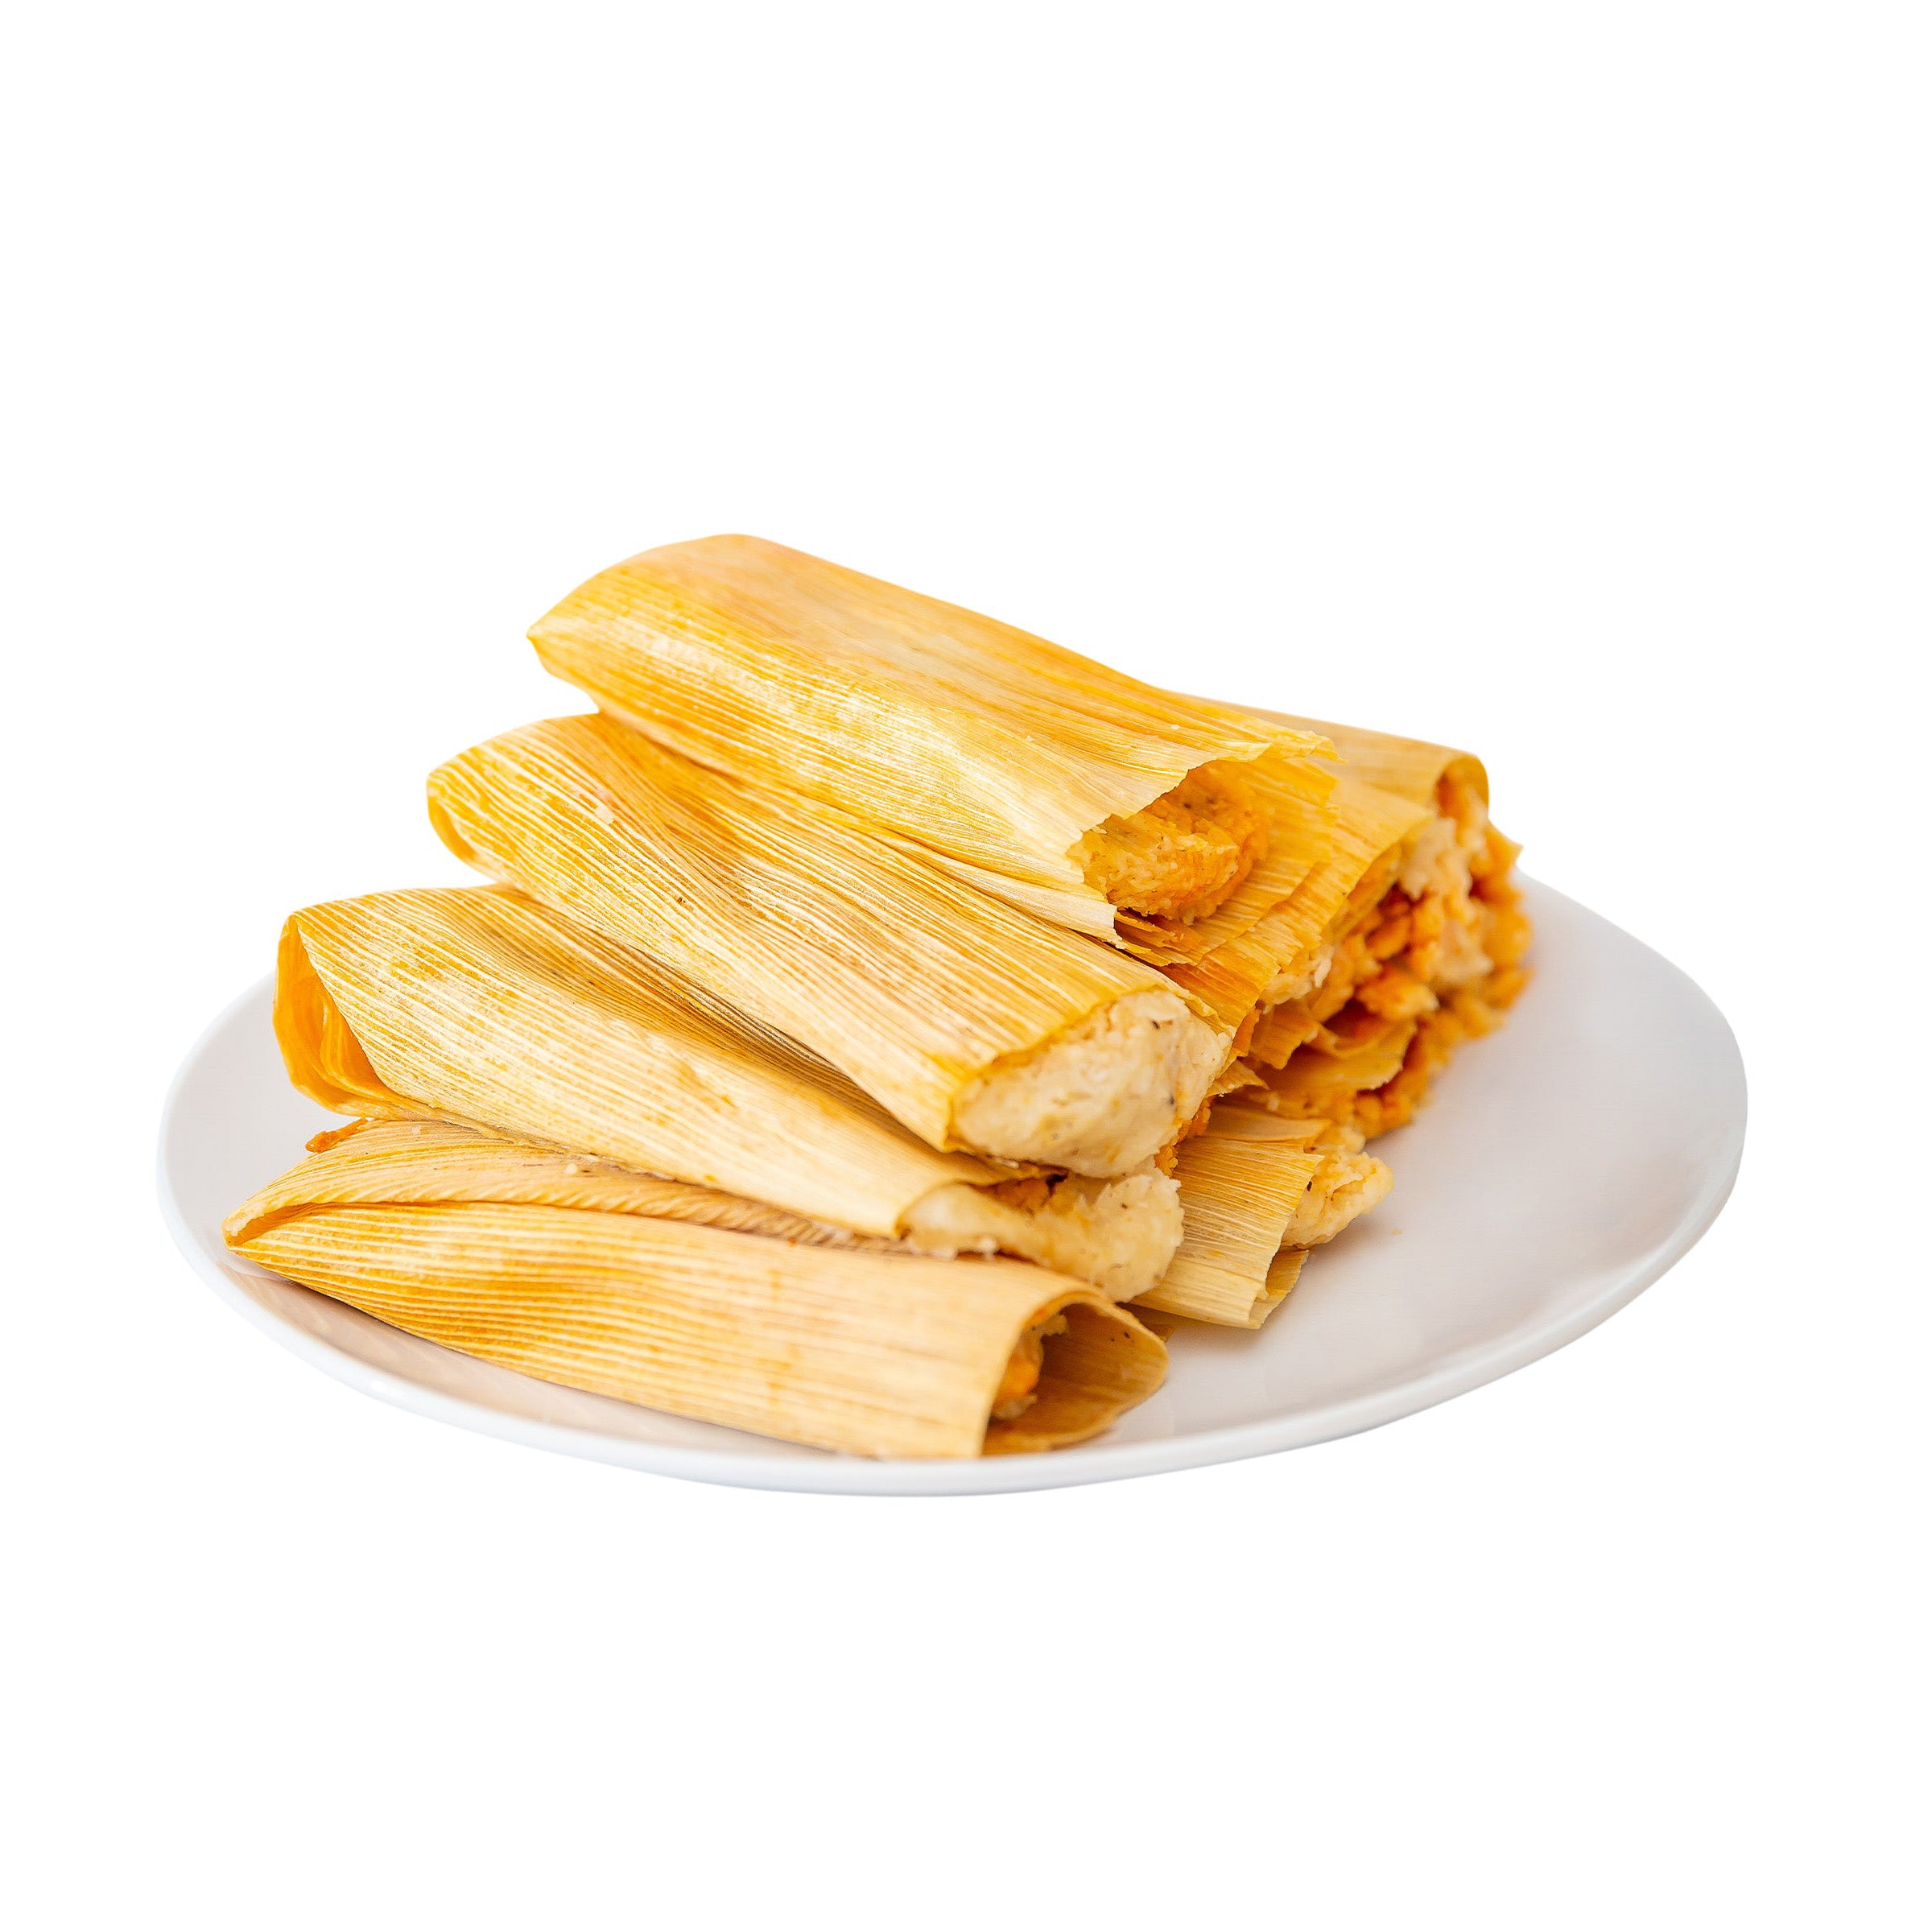 A plate of freshly made Hatch Green Chile Veggie Tamales with golden corn husks, containing visible fillings, isolated on a white background.